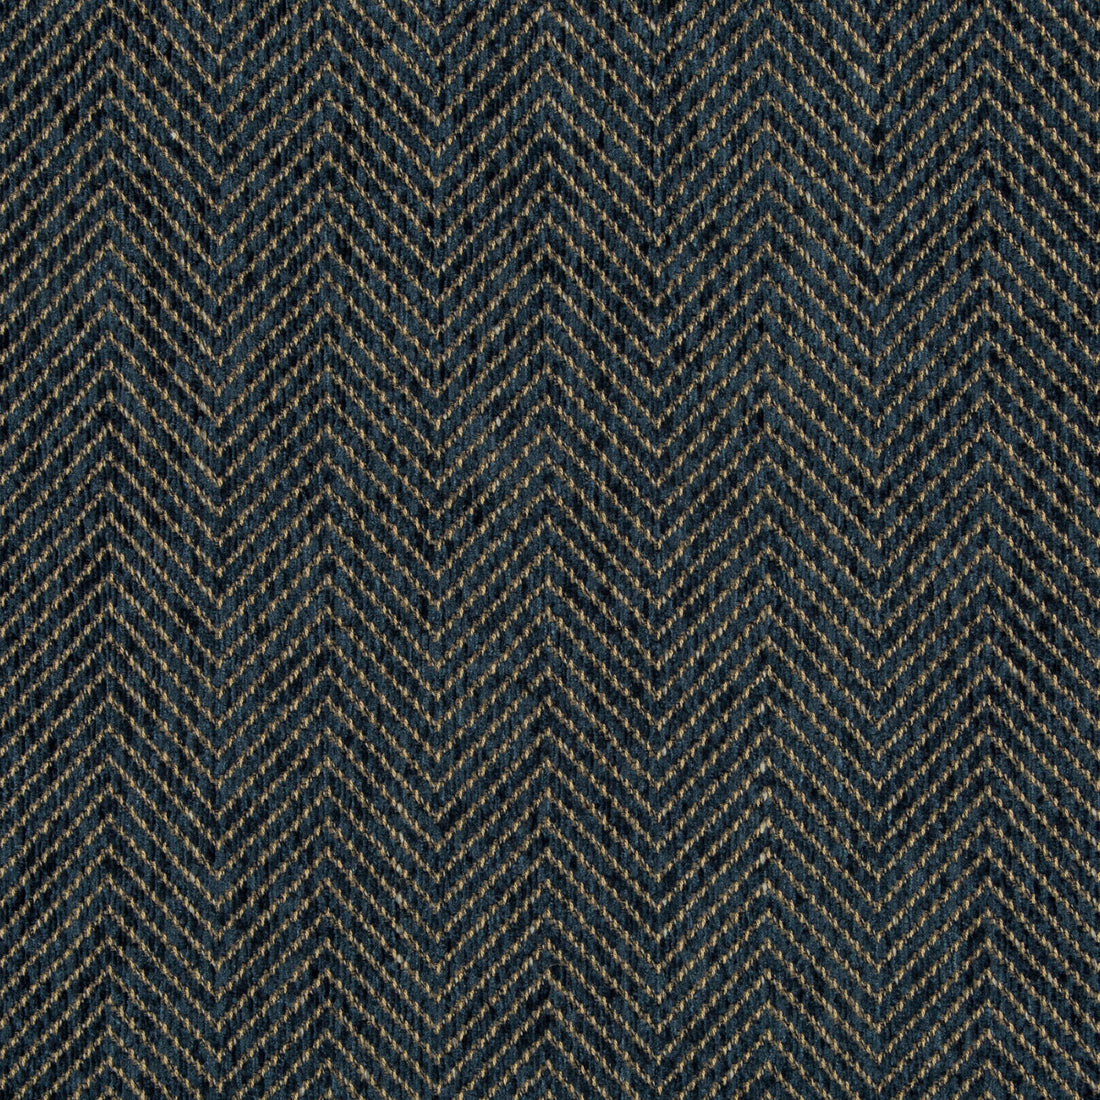 Kravet Smart fabric in 34297-511 color - pattern 34297.511.0 - by Kravet Smart in the Woven Colors collection